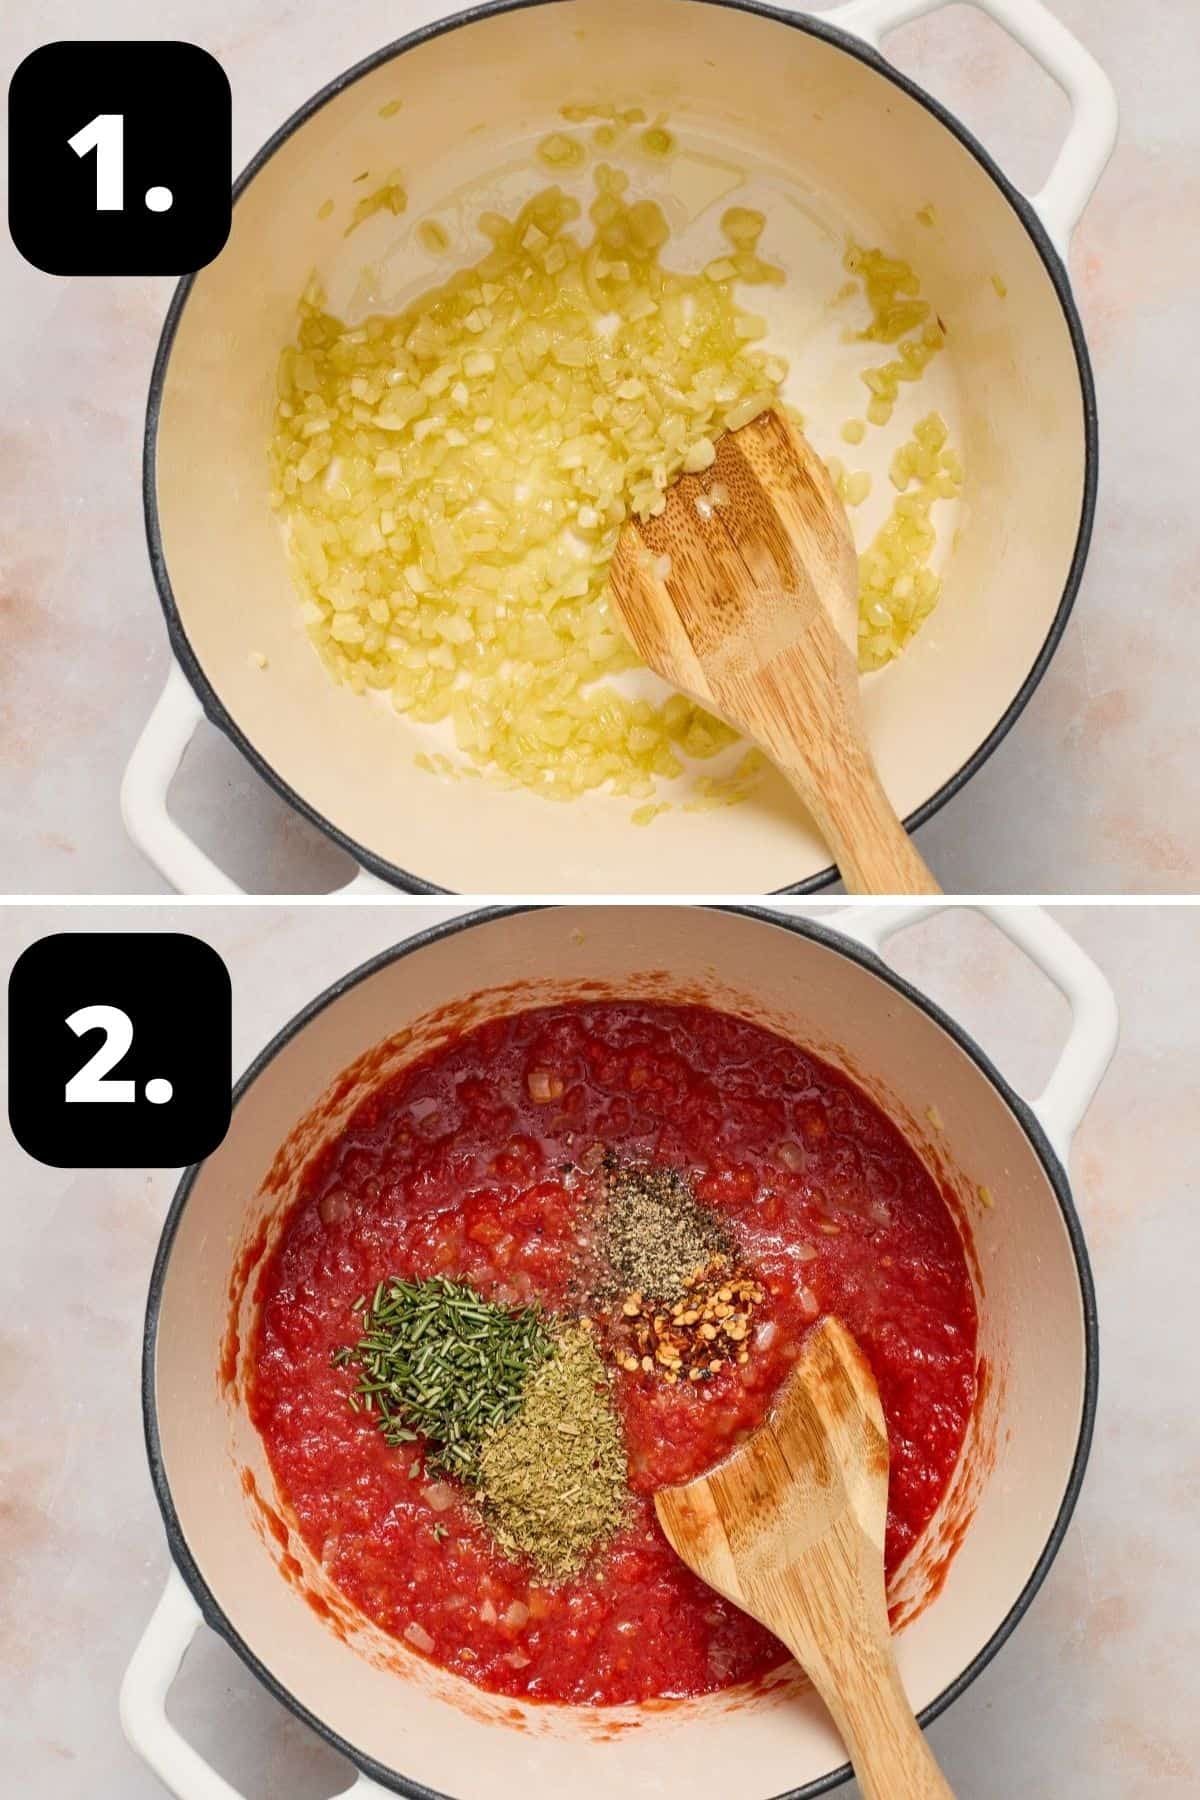 Steps 1-2 of preparing this recipe: cooking the onion in a saucepan and adding in the tomato and seasonings.